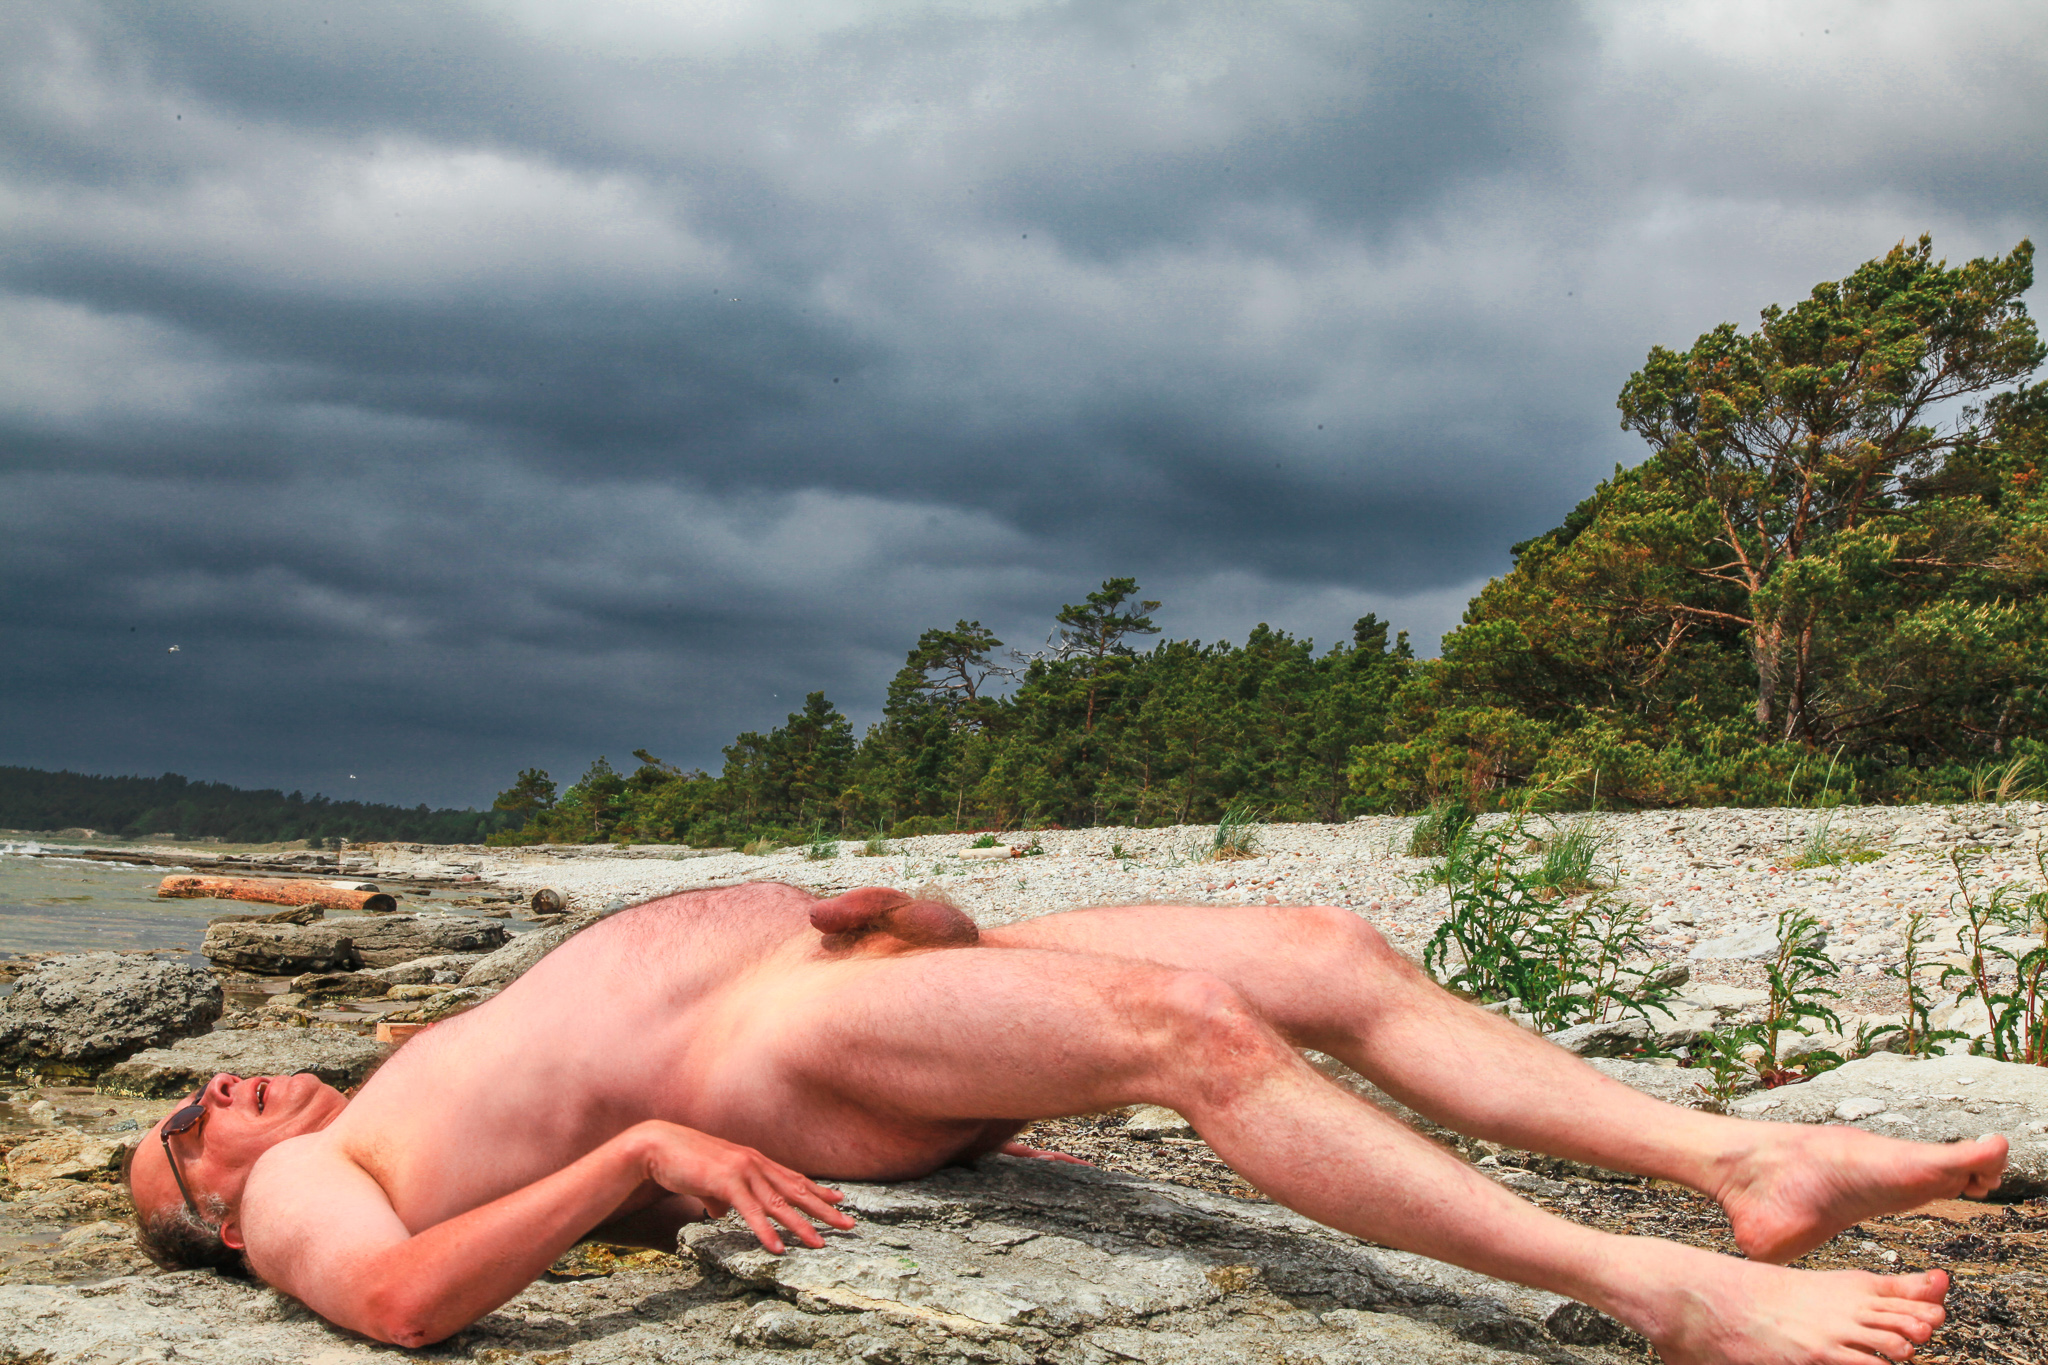 Nude man with his genitals exposed on a Gotland beach